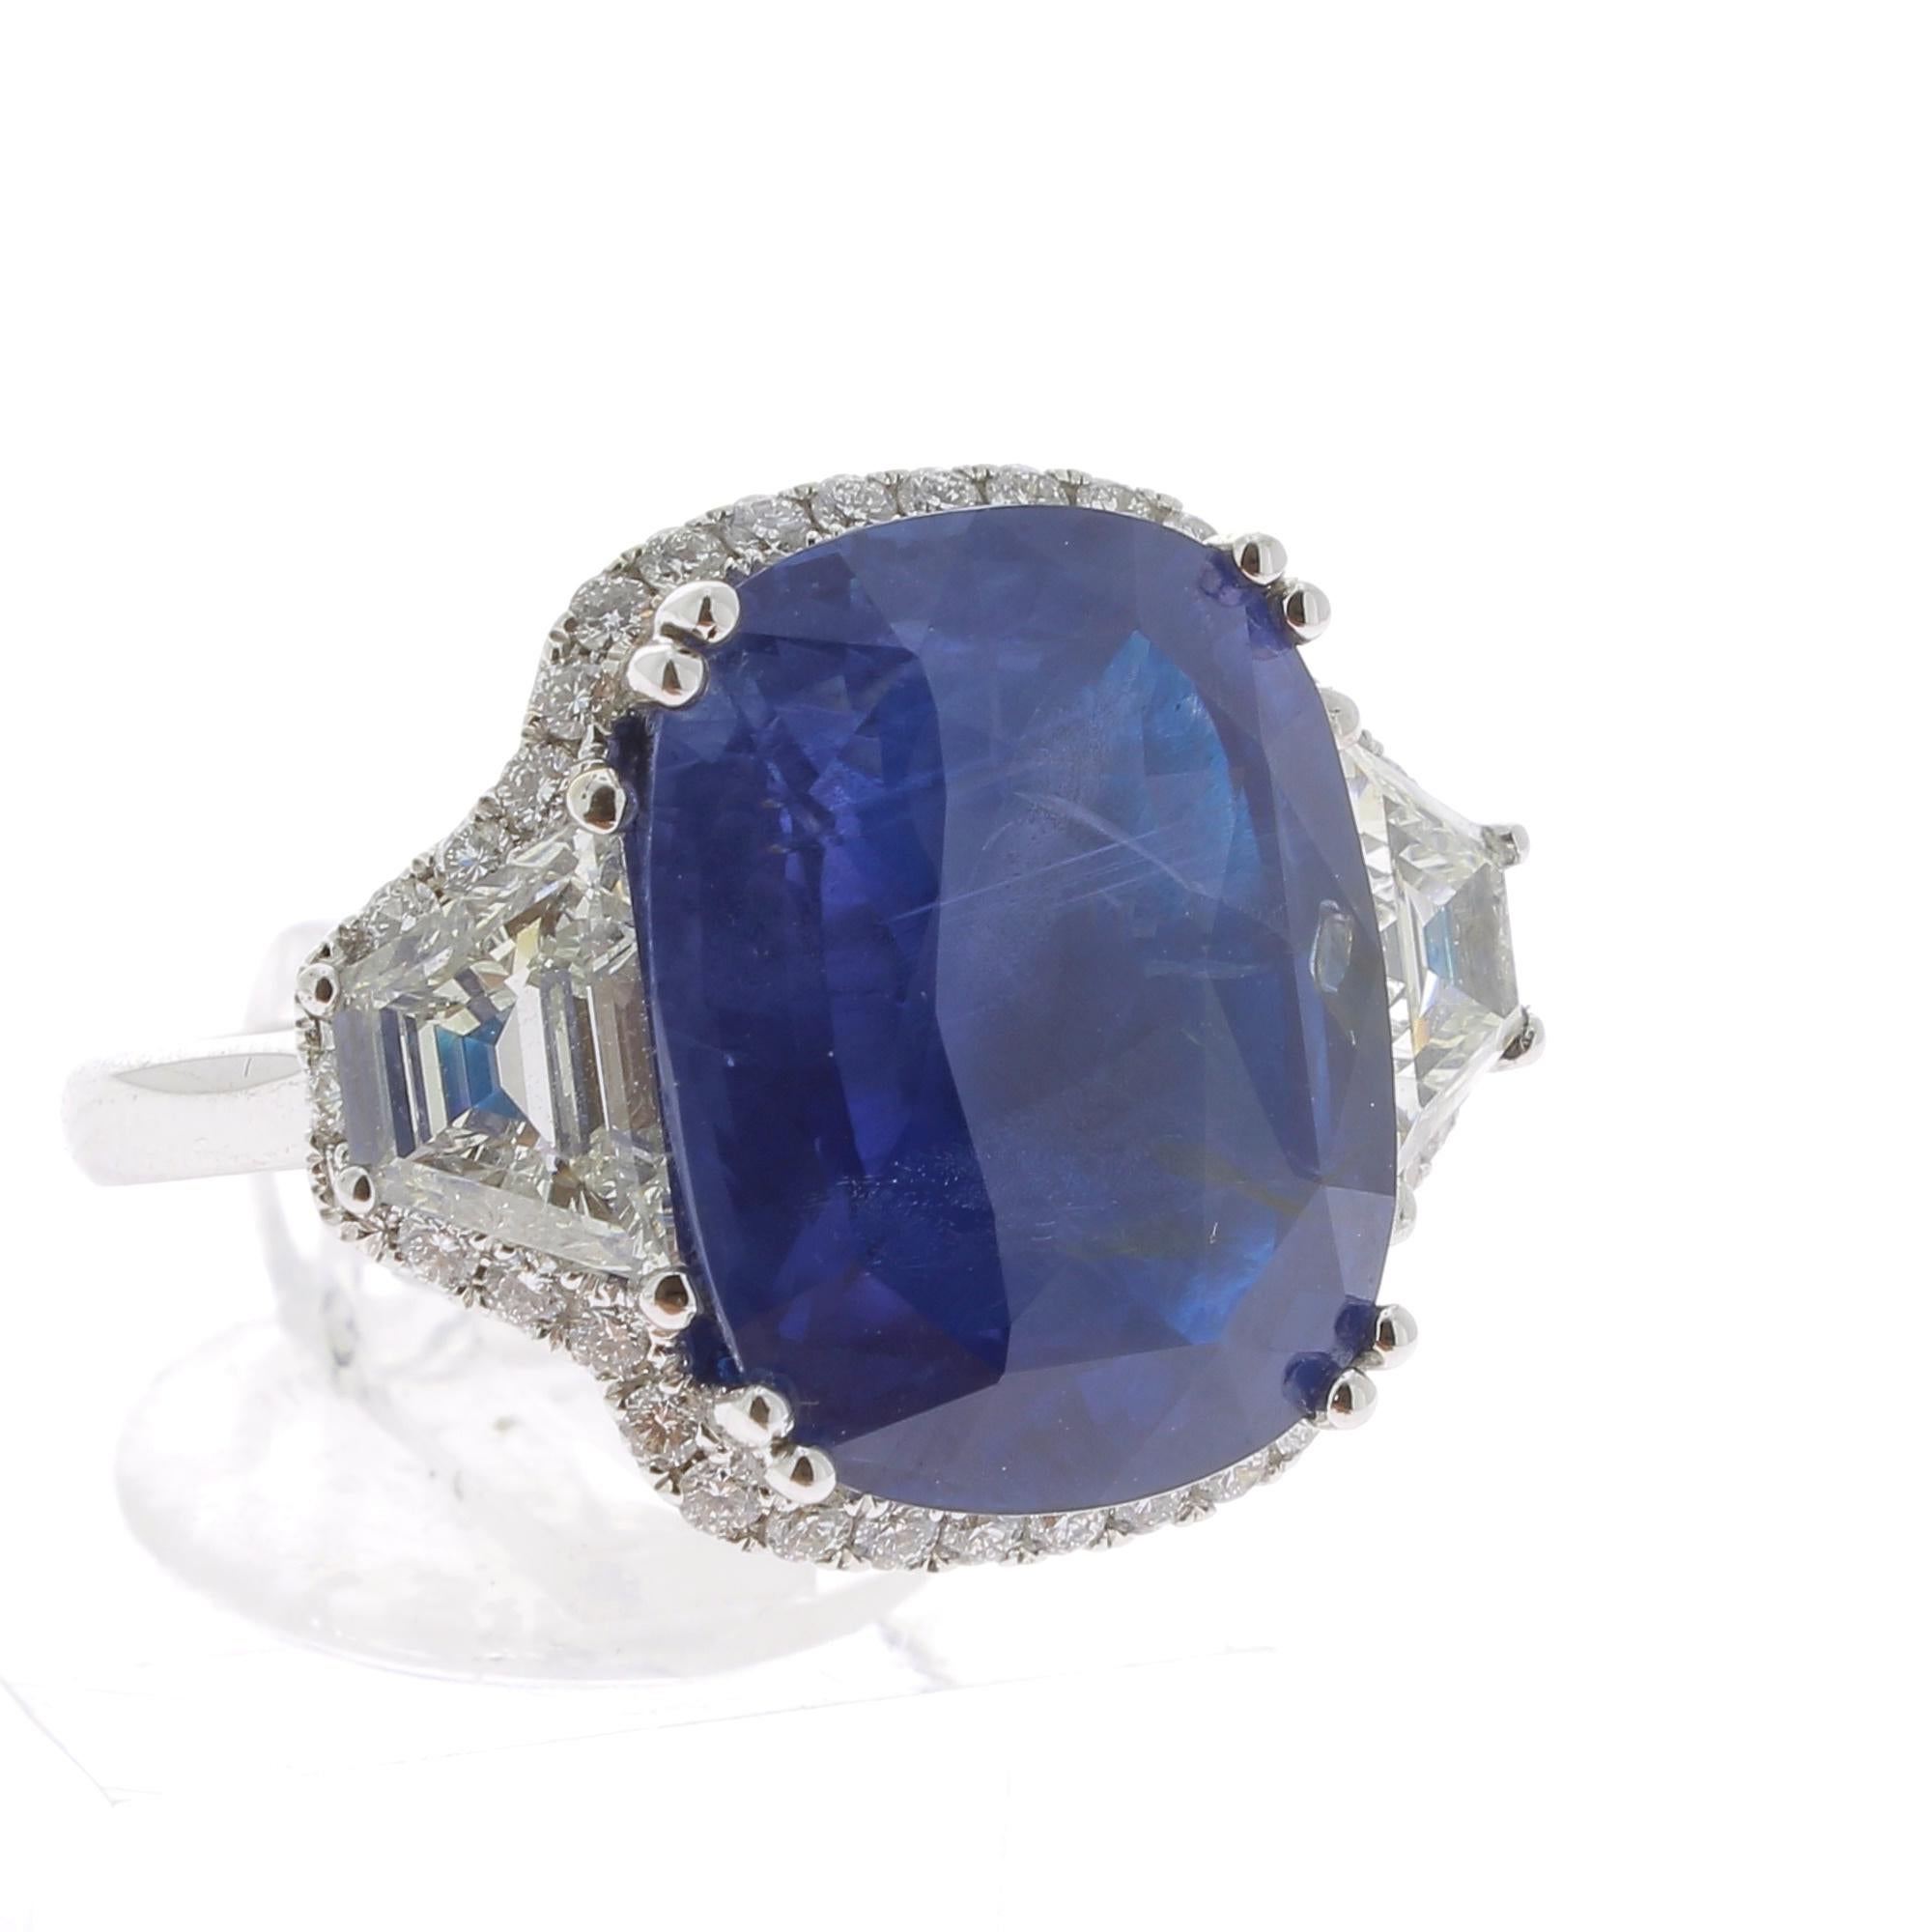 A Large and an amazing Cushion Ceylon Sapphire Ring, flanked on each side by a single Triangle Diamond and surround with an halo of Diamond weighing 0.48 Carats.
The total weight of the Ceylon  Sapphire ( or Sri Lanka Sapphire ) is 19.95 Carats.
The